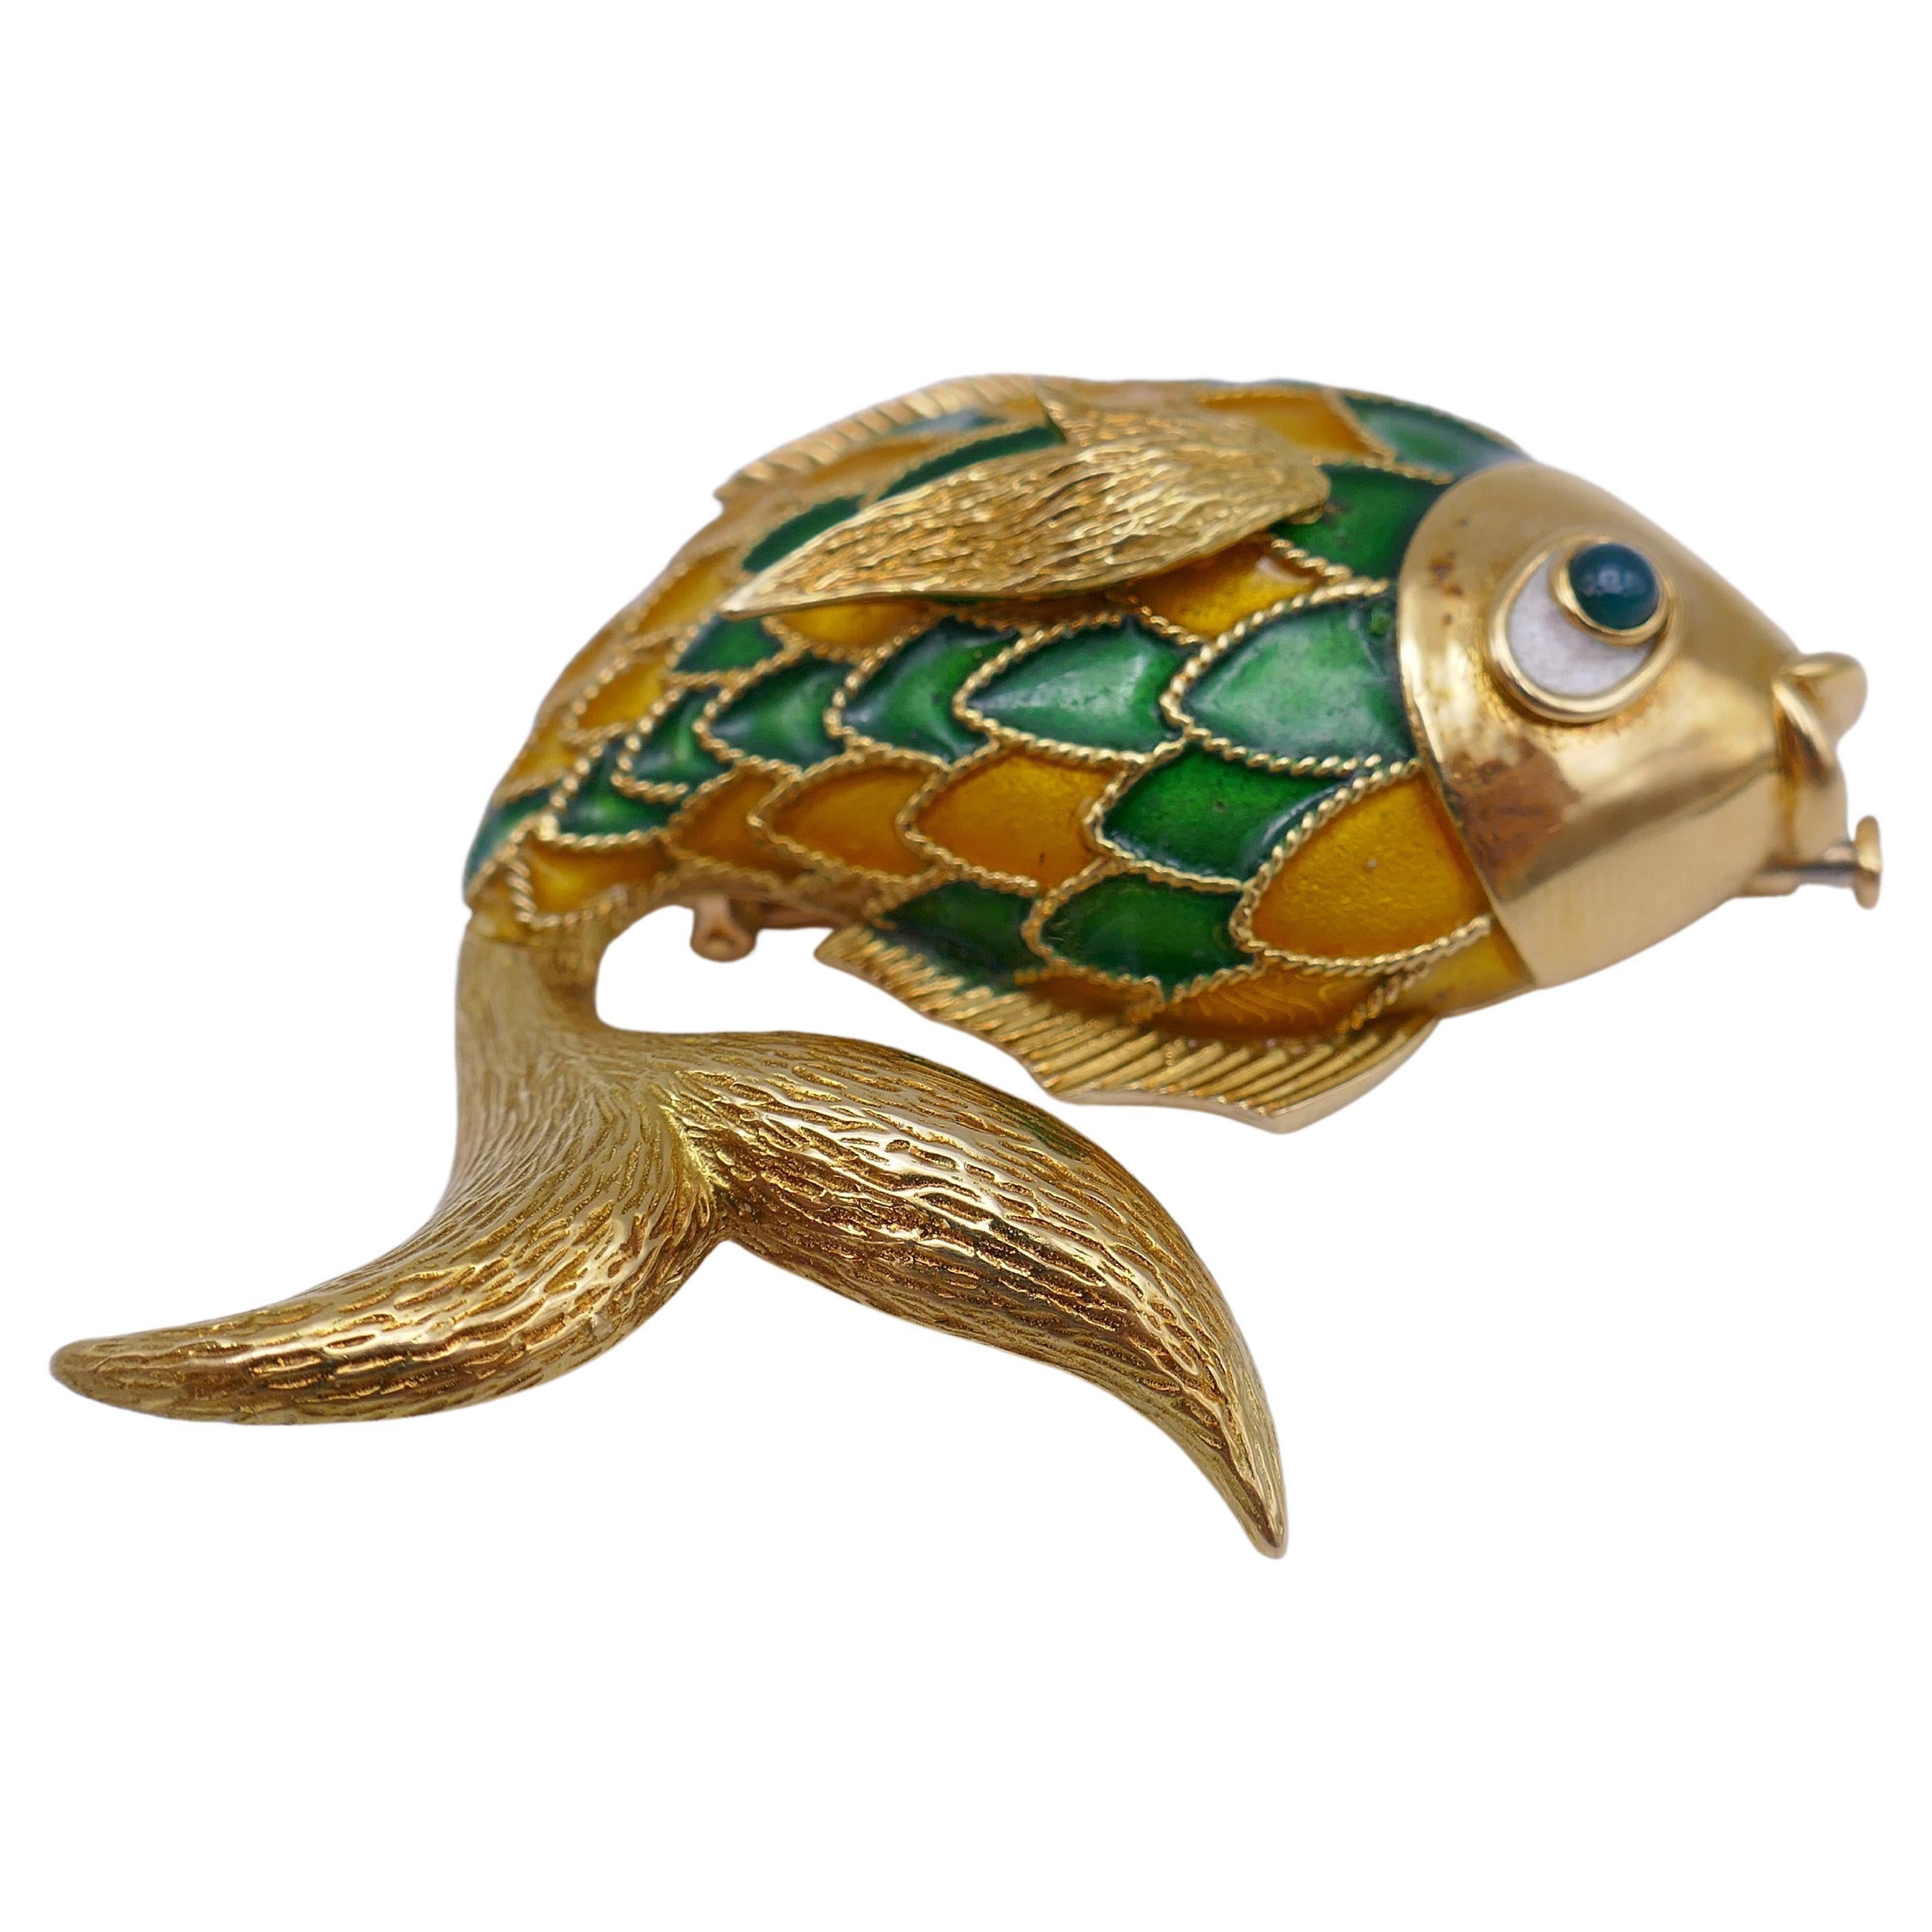 A Boucheron pendant and brooch in one. 
Made of 18k gold and enamel, this gorgeous Fish jewelry piece features great details that embrace the character of the item.
The finely braided gold scales accent with colorful yellow and green enamel. The